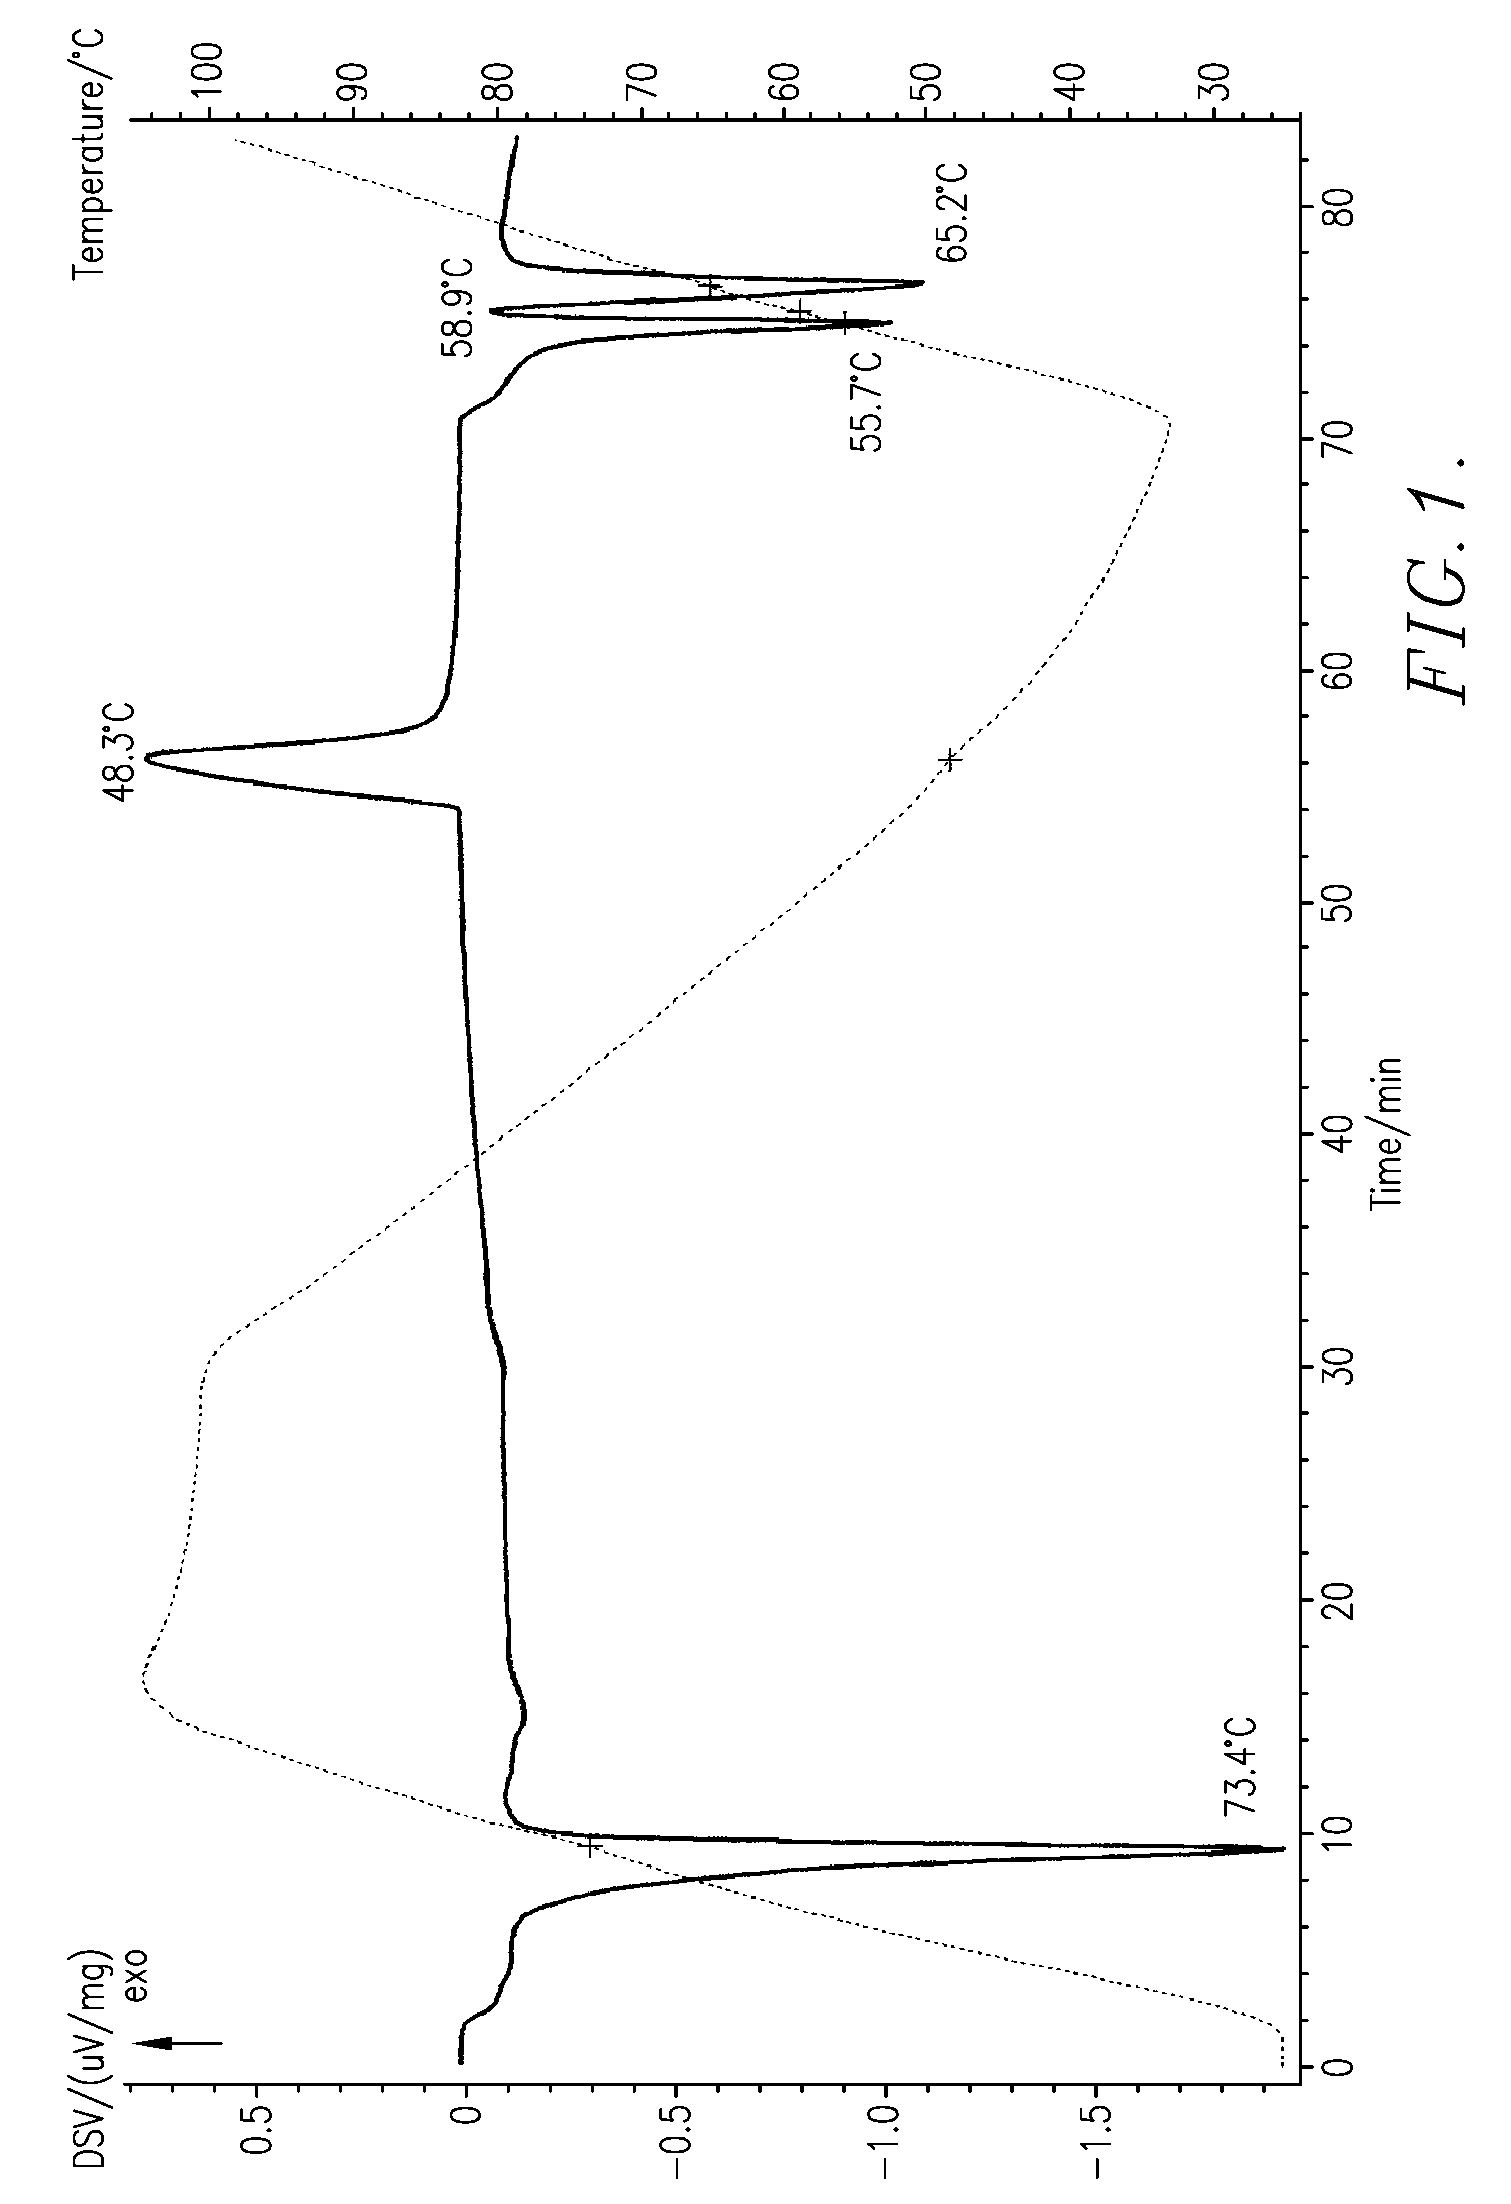 Non-hydrogenated vegetable oil based shortening containing an elevated diglyceride emulsifier composition